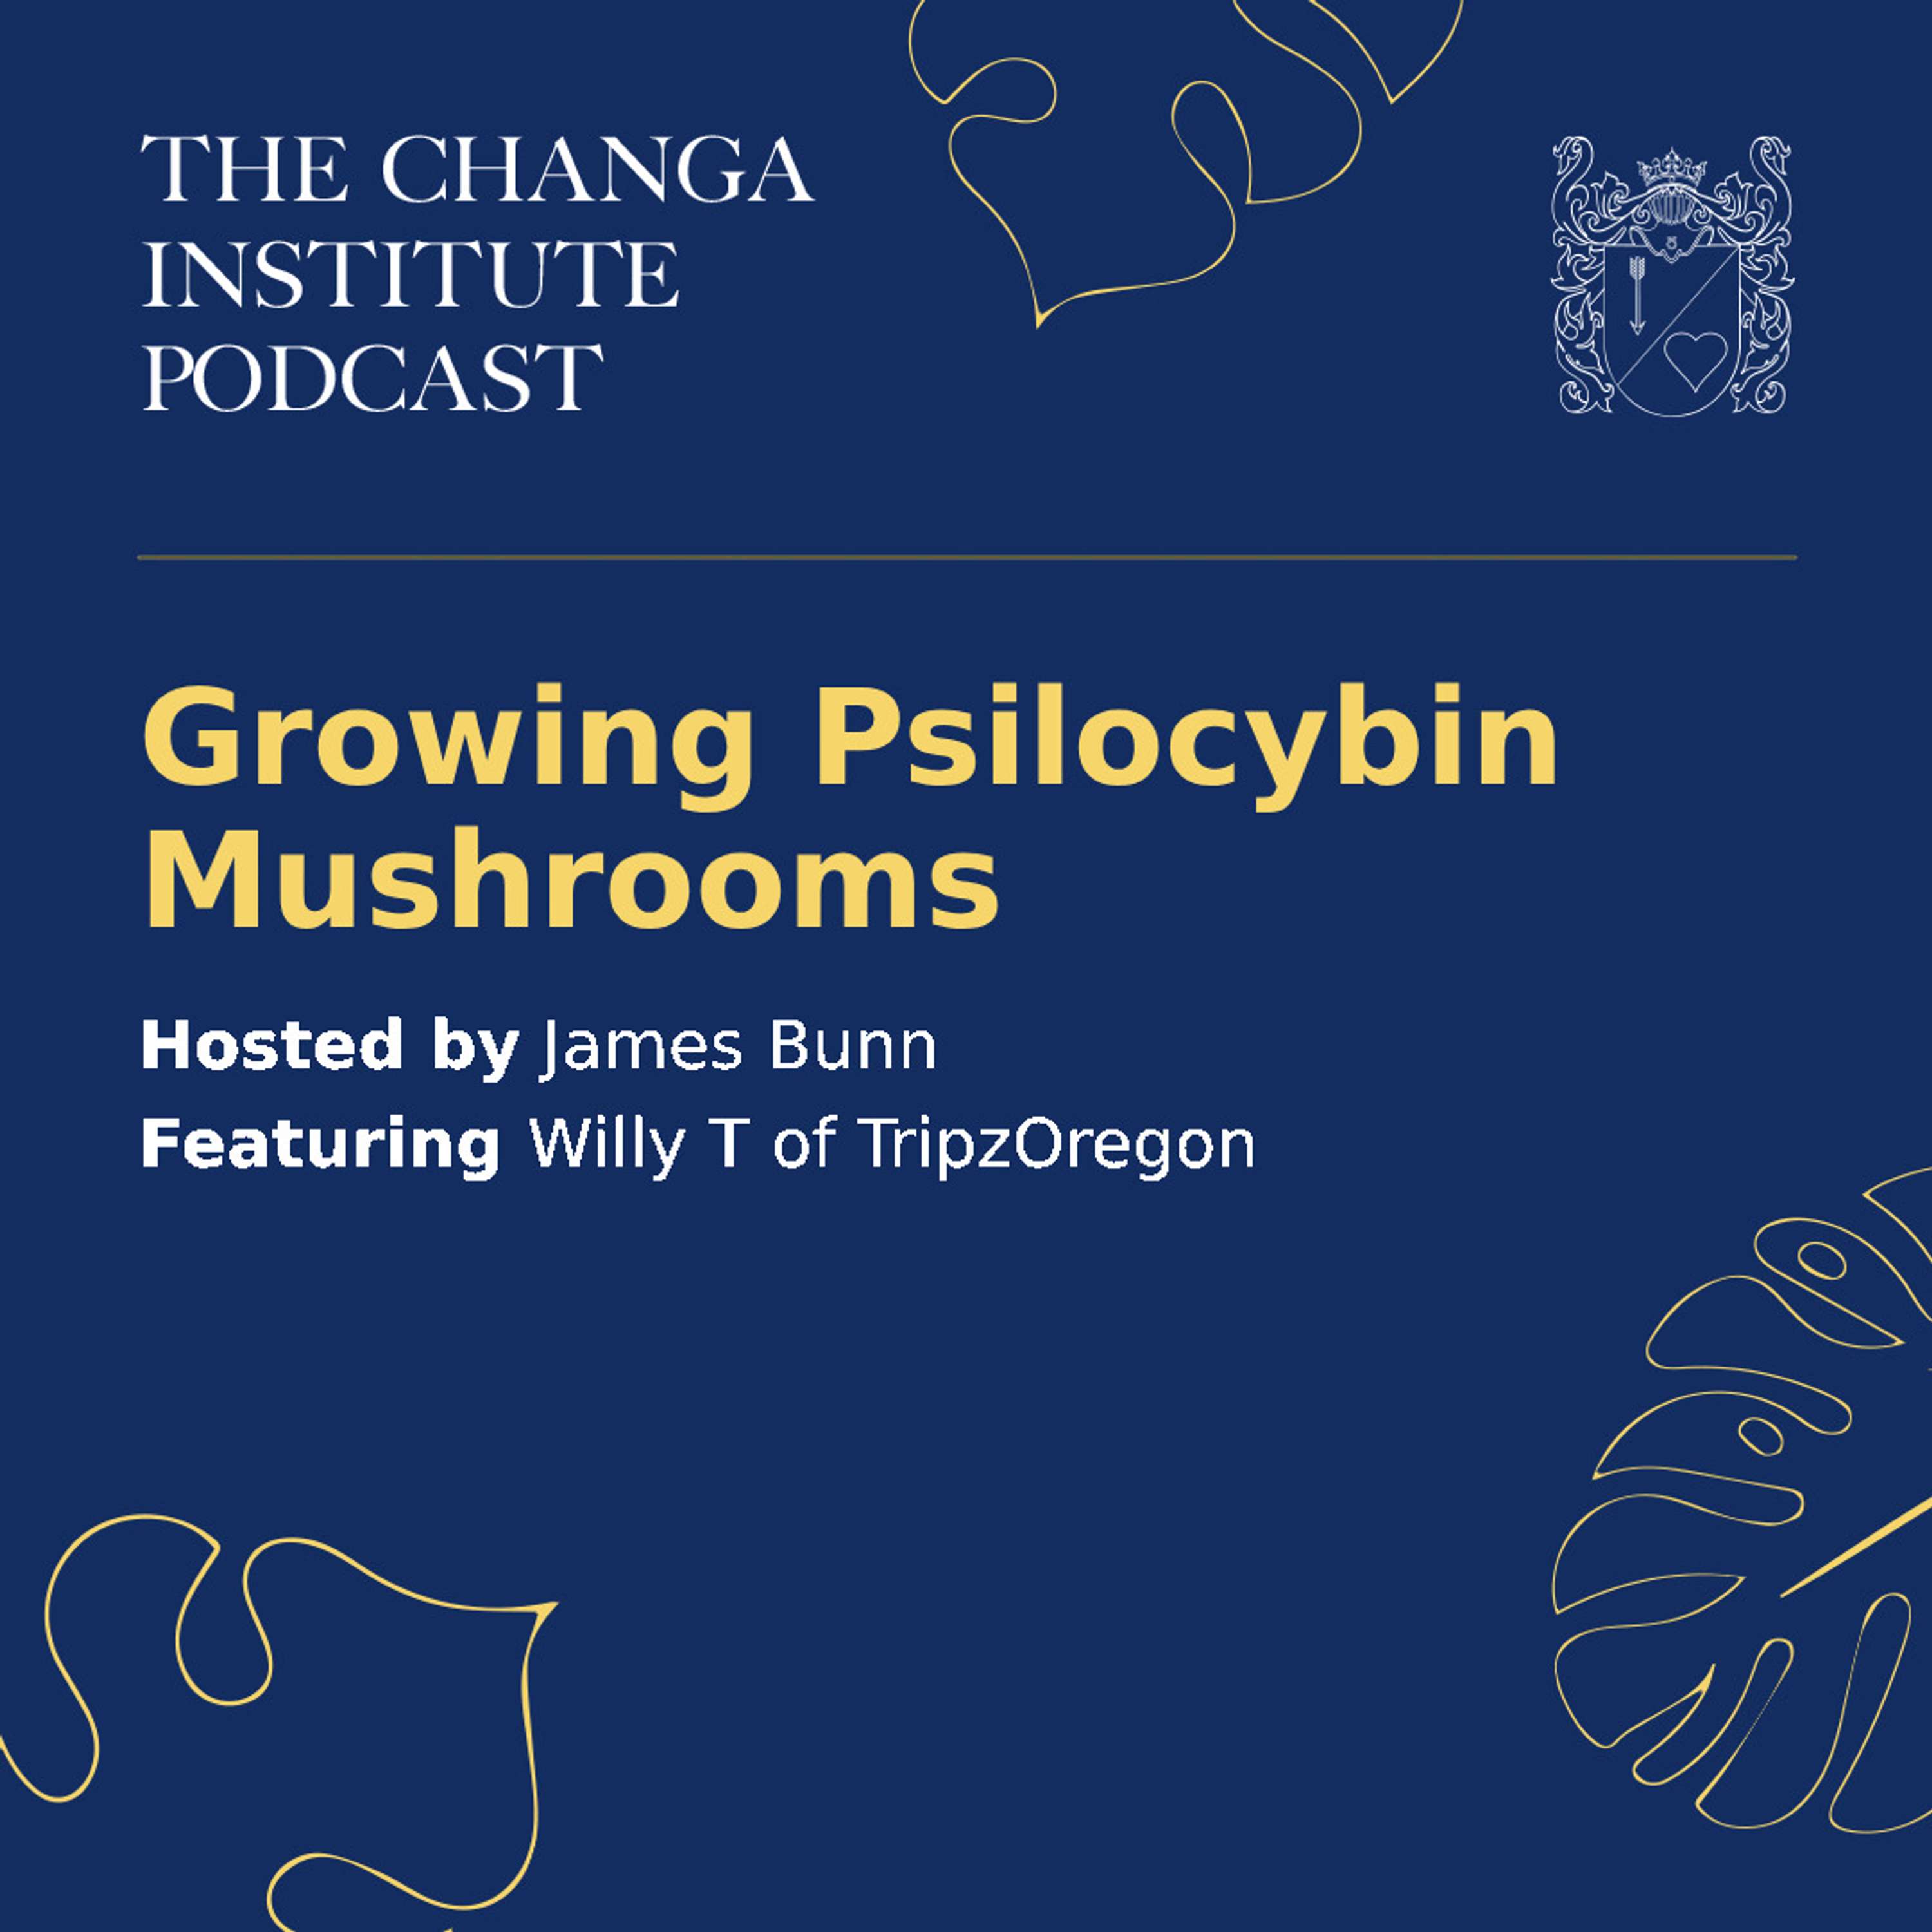 #2 - Growing Psilocybin Mushrooms with Willy T